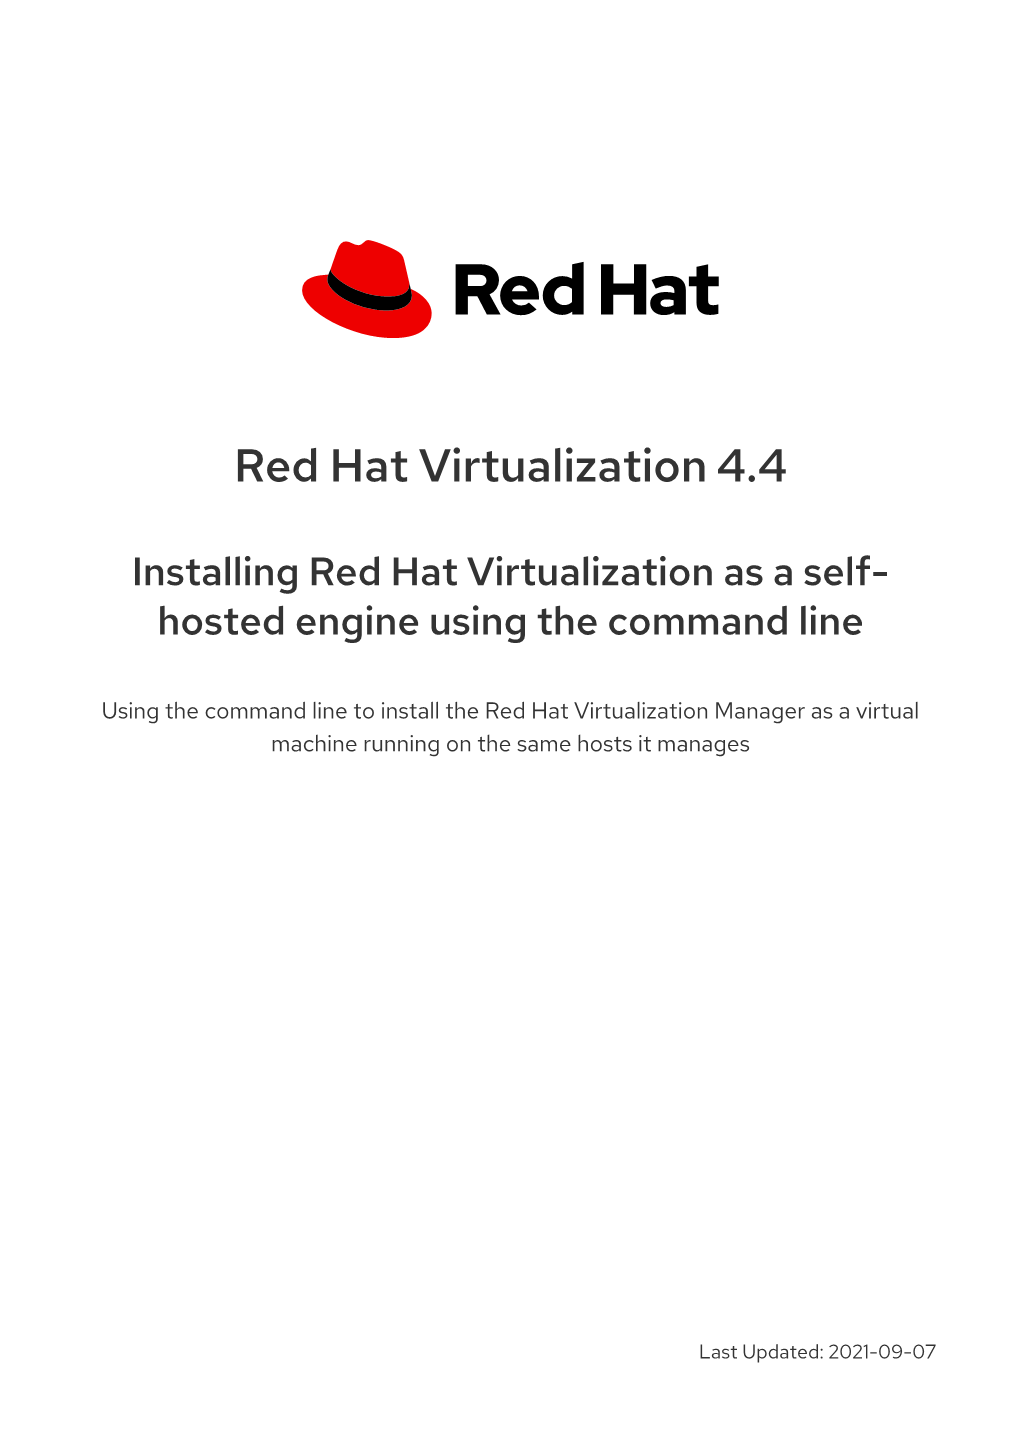 Red Hat Virtualization 4.4 Installing Red Hat Virtualization As a Self-Hosted Engine Using the Command Line